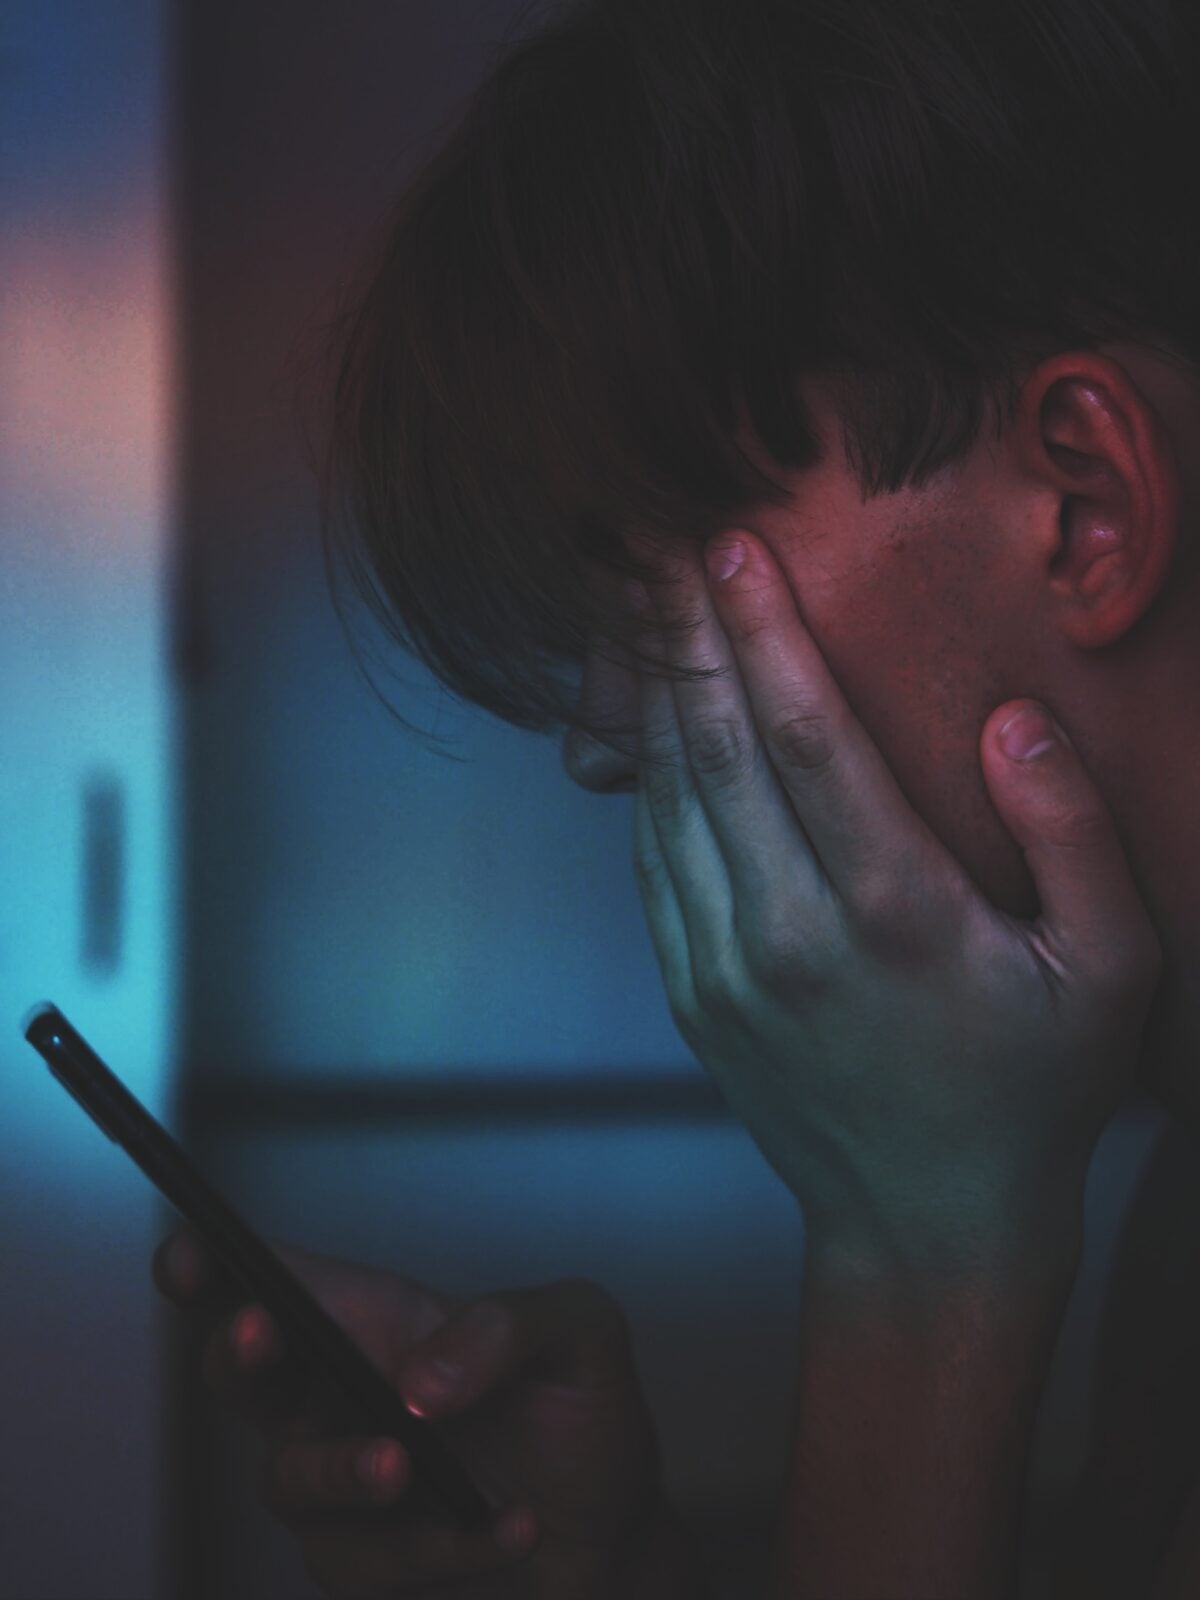 A Young Man Using His Phone And Resting A Hand On His Face In A Gloomy Fashion.